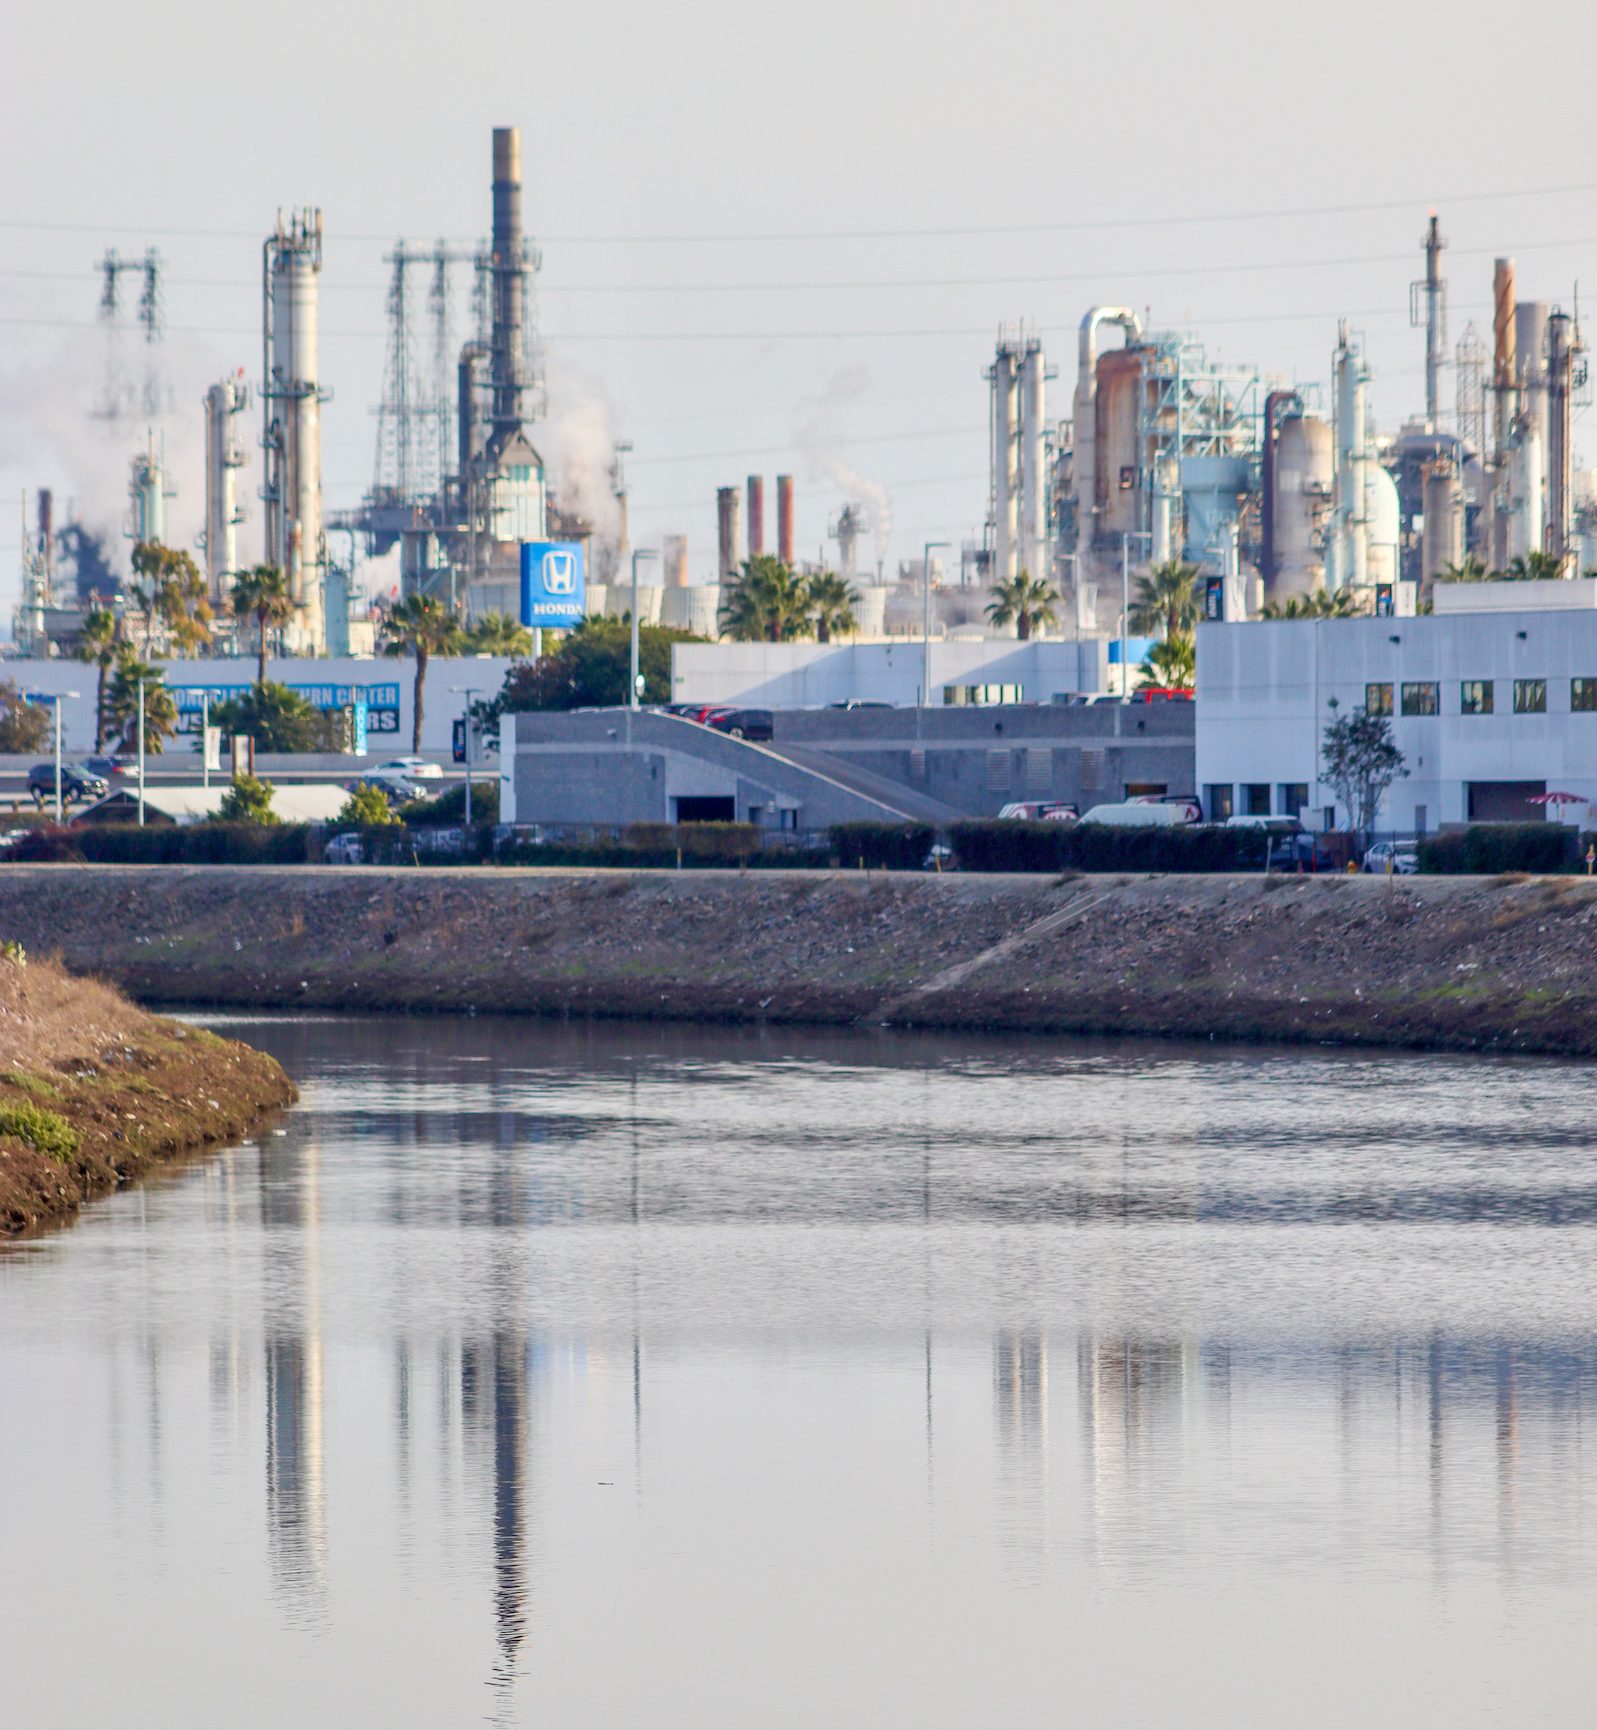 The Marathon Refinery towers over the Dominguez Channel in Carson, California.